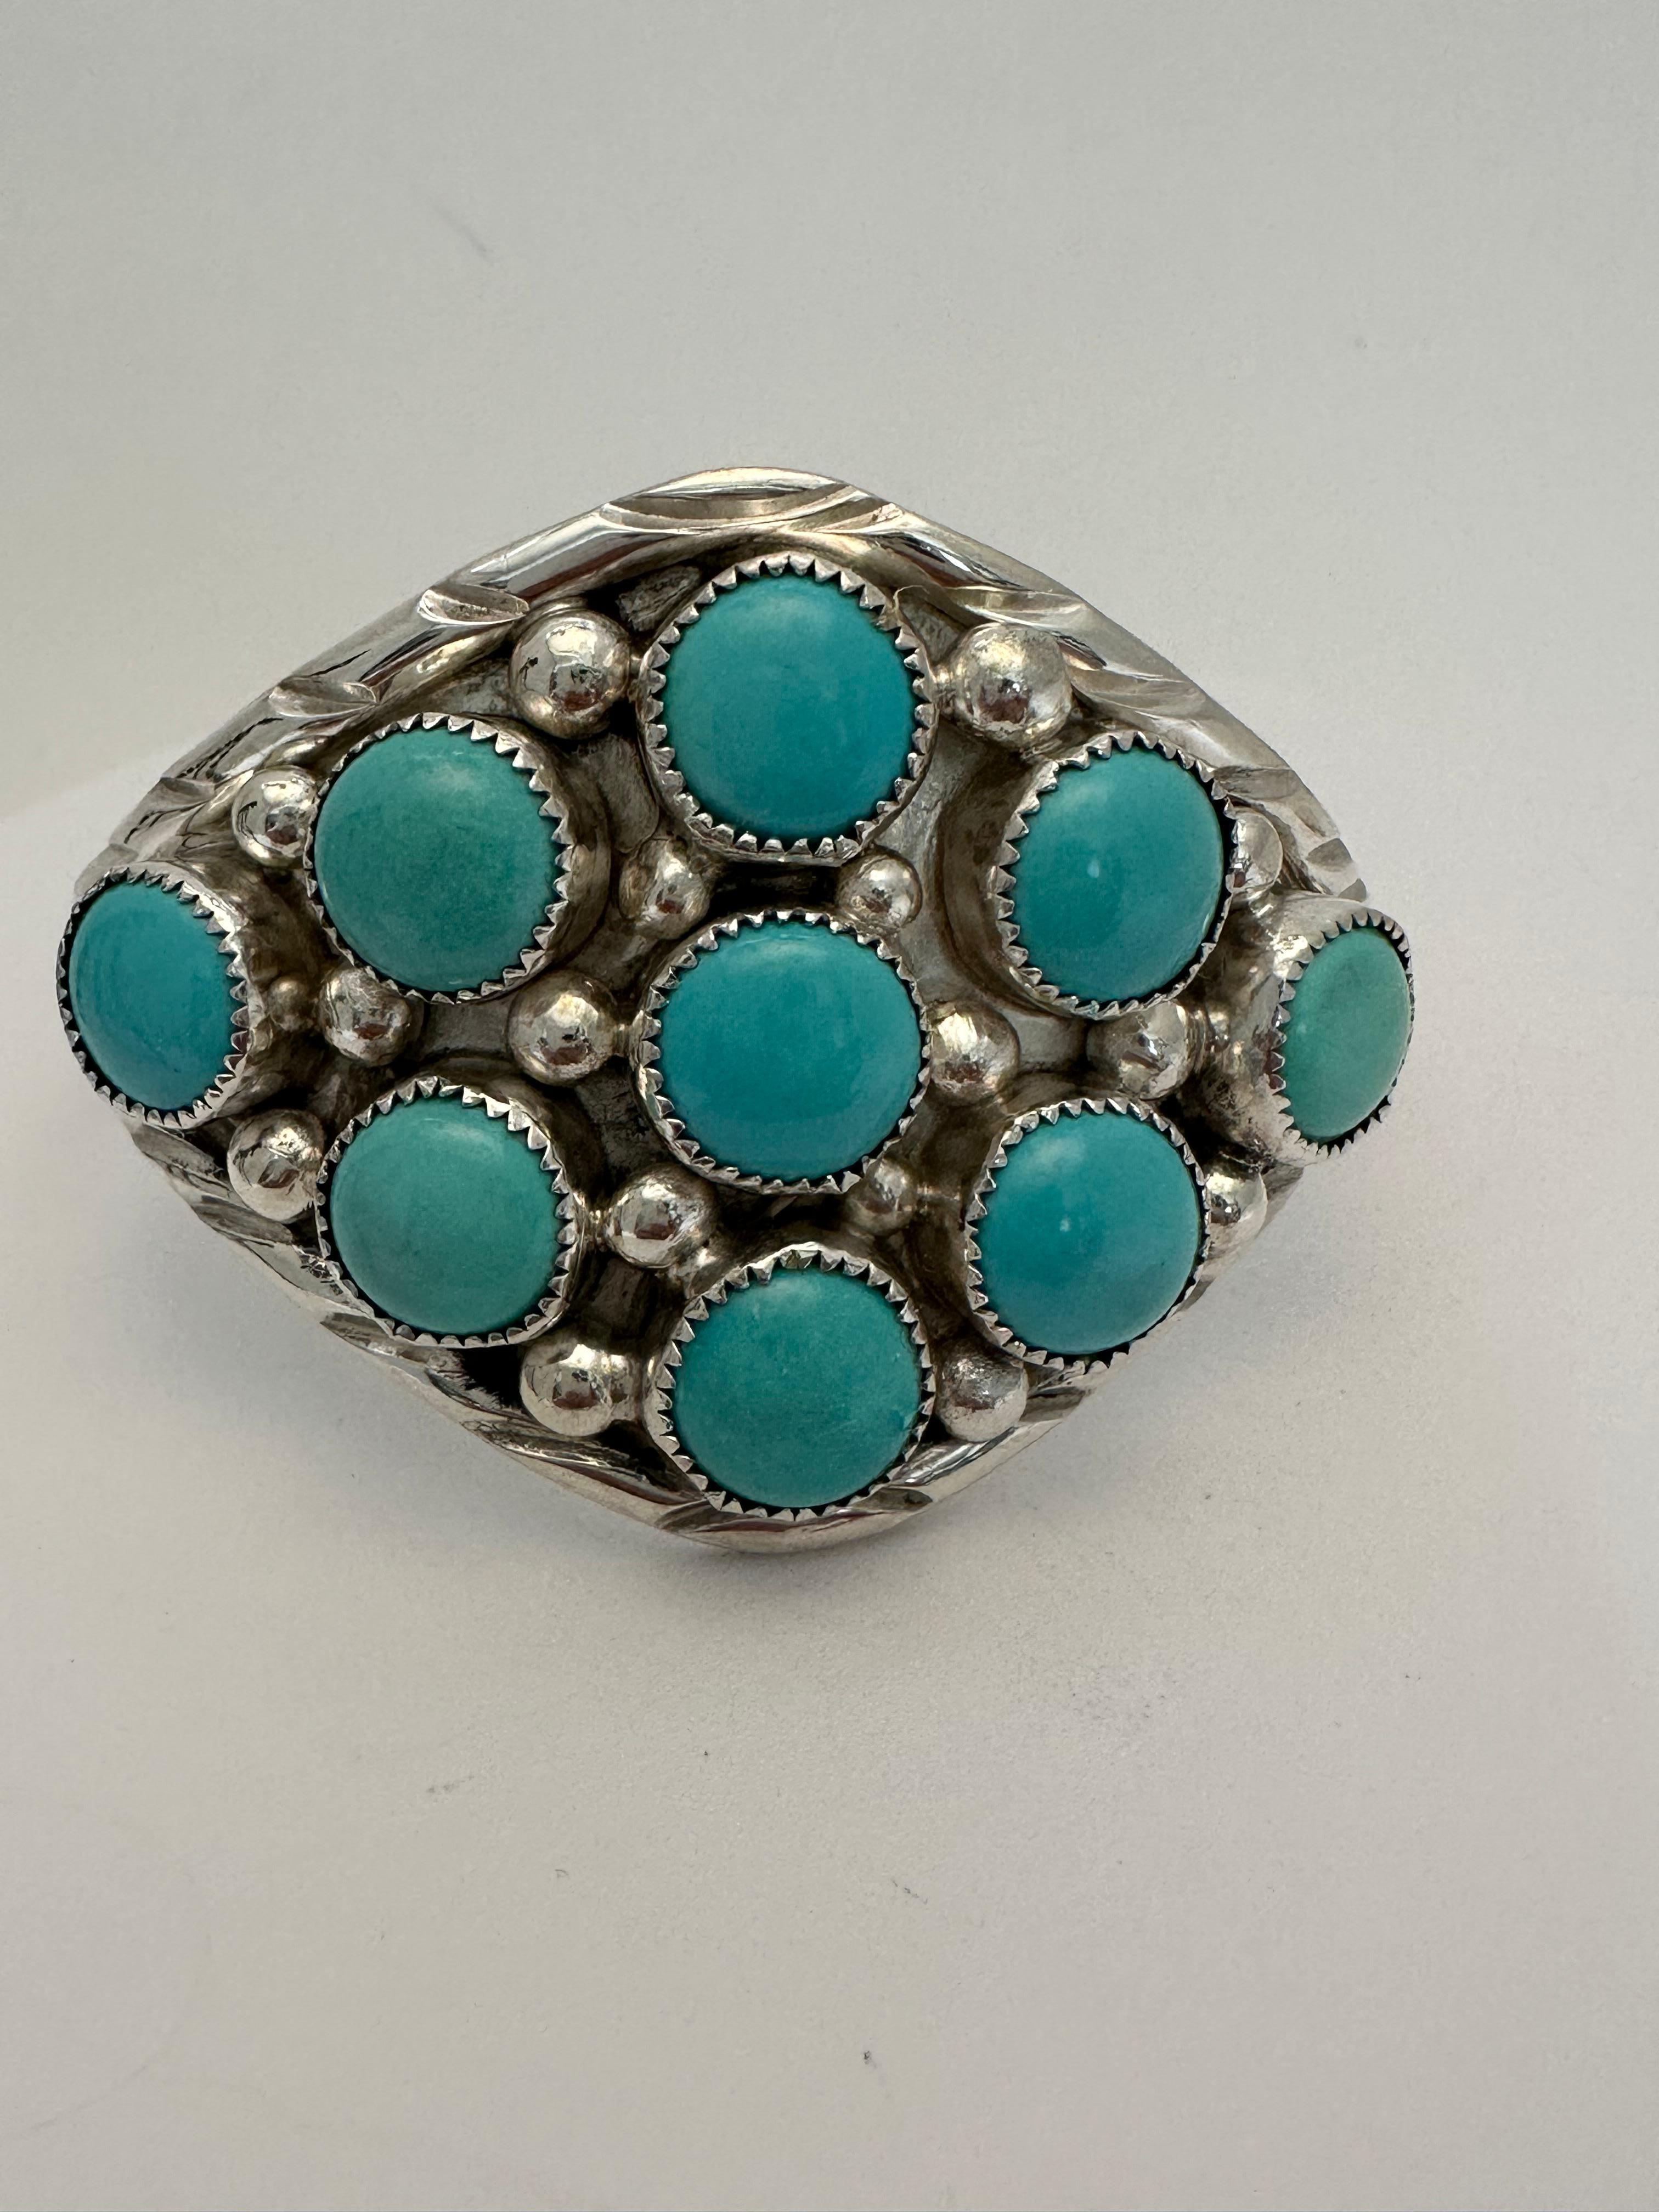 Vintage Sterling Silver Kingman Turquoise Cuff Bracelet by Navajo Silver Ray  In Excellent Condition For Sale In Las Vegas, NV